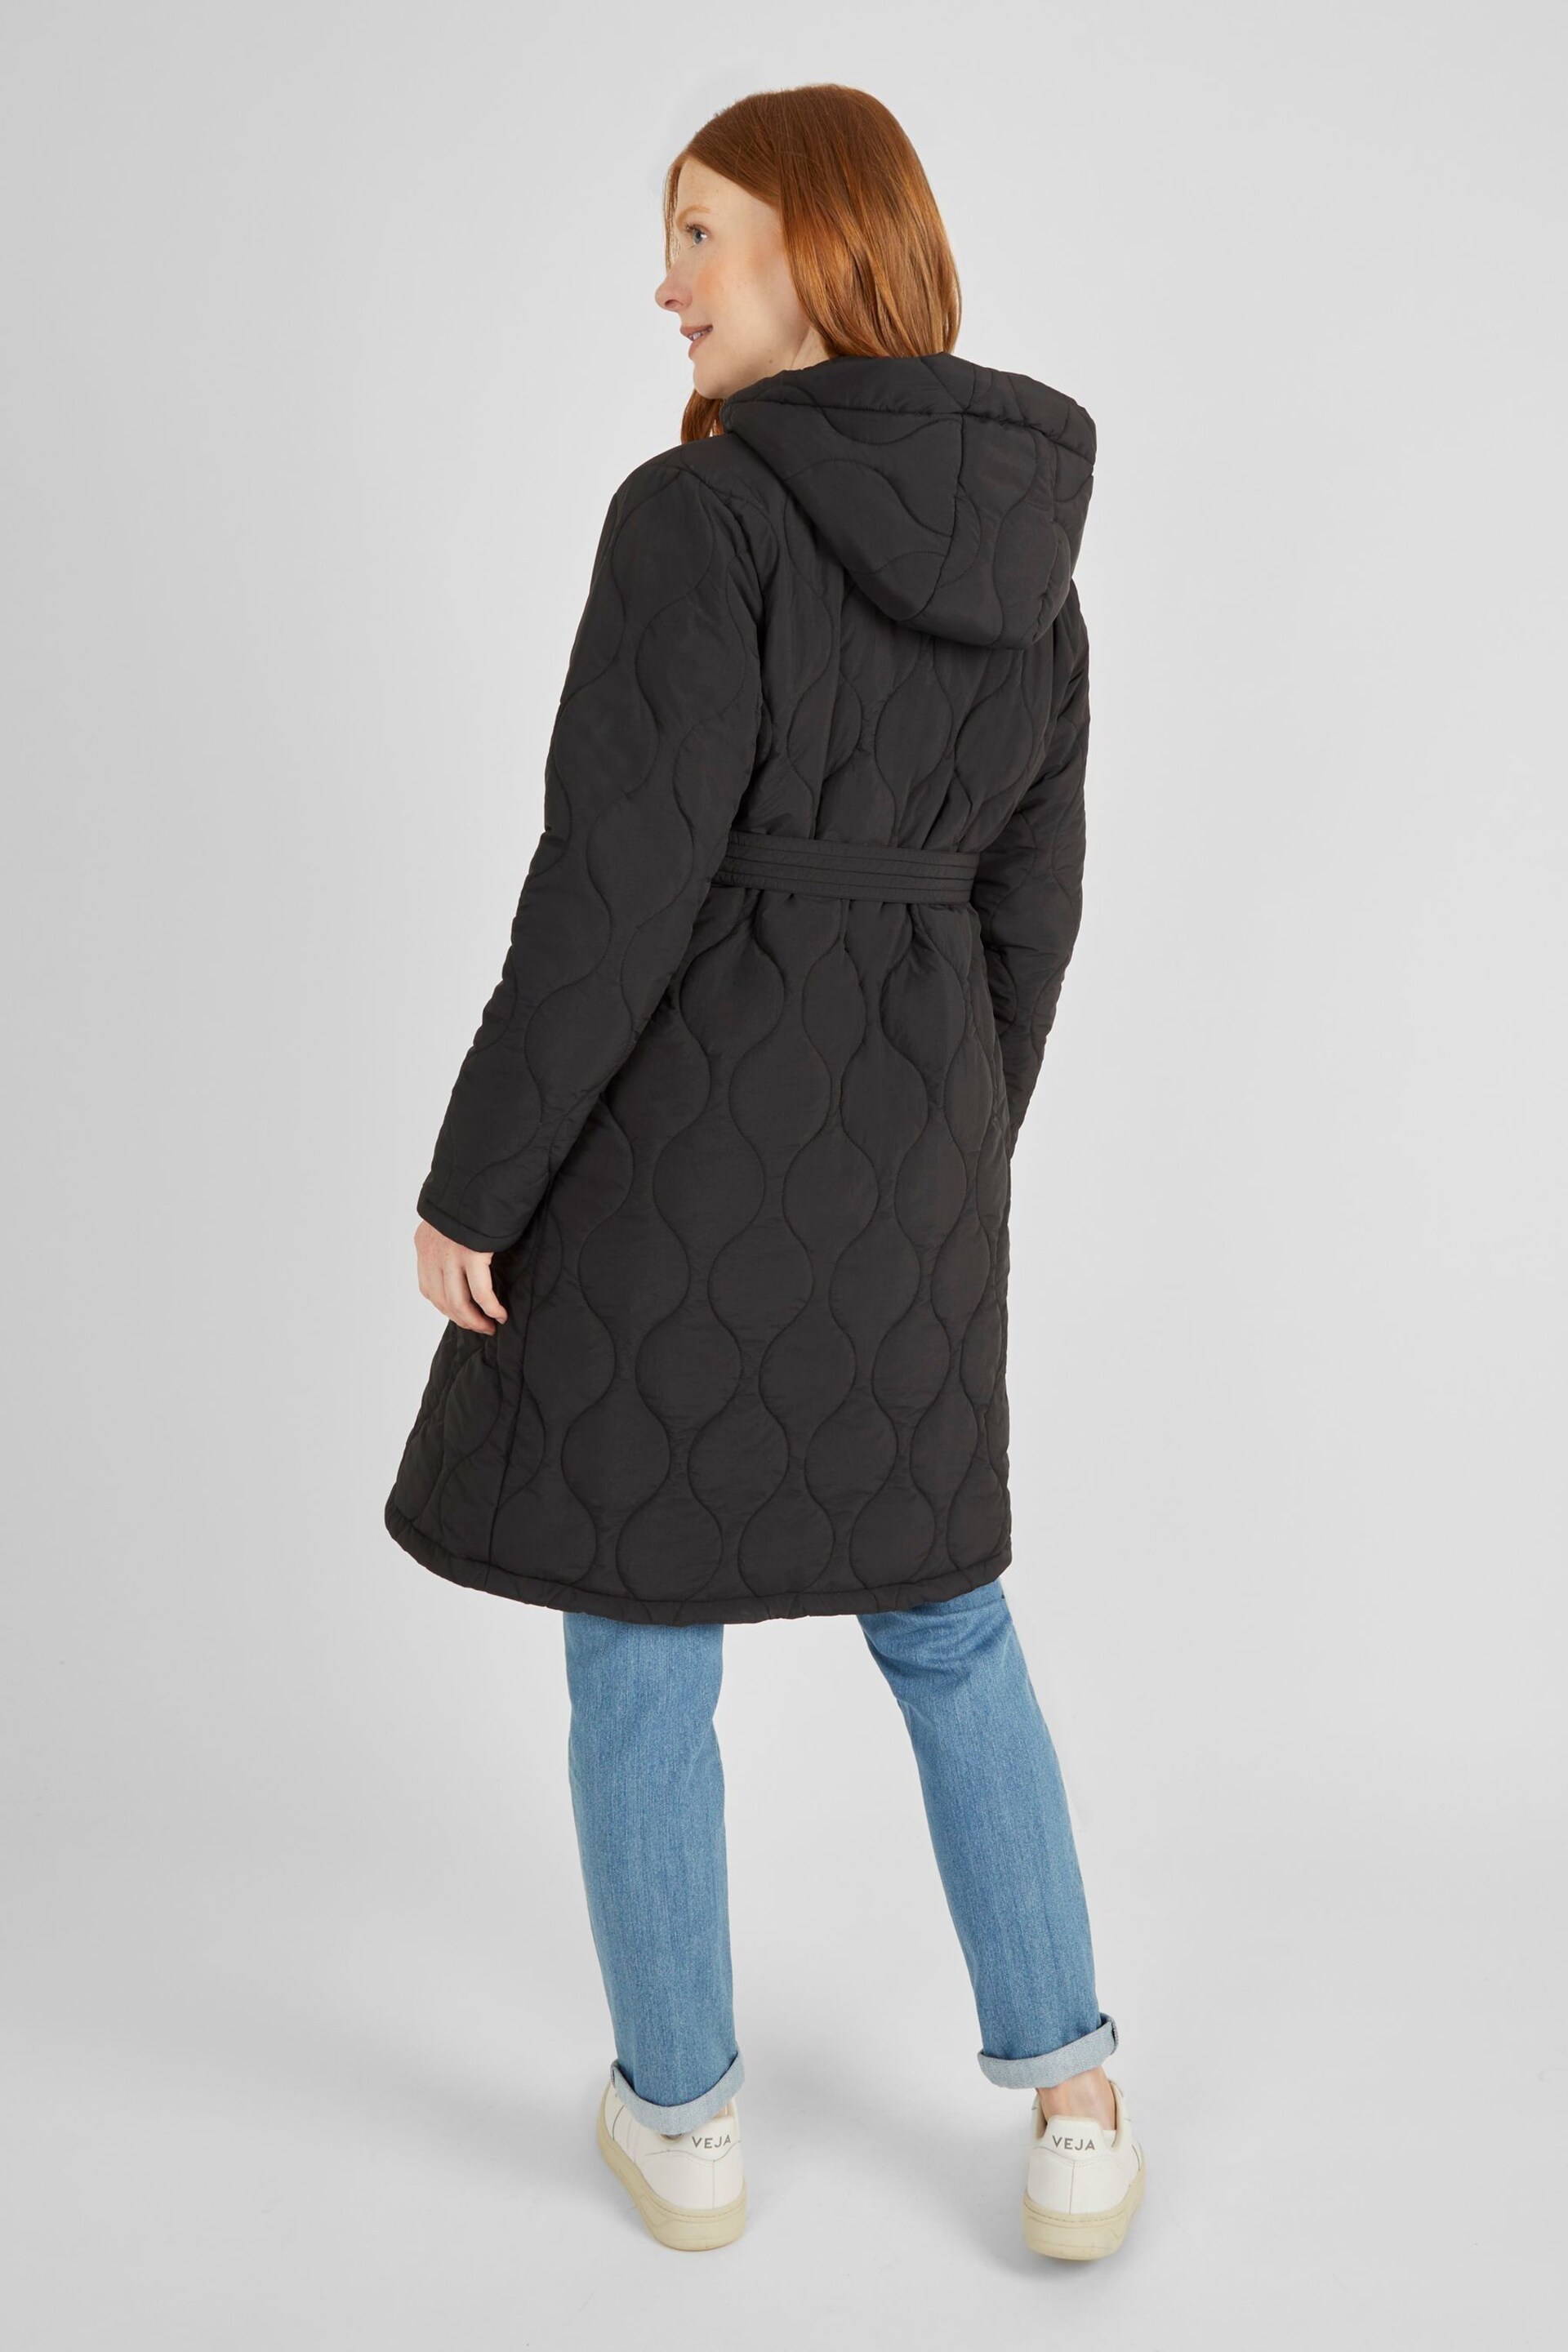 JoJo Maman Bébé Khaki 2-in-1 Quilted Maternity Puffer Coat - Image 2 of 6